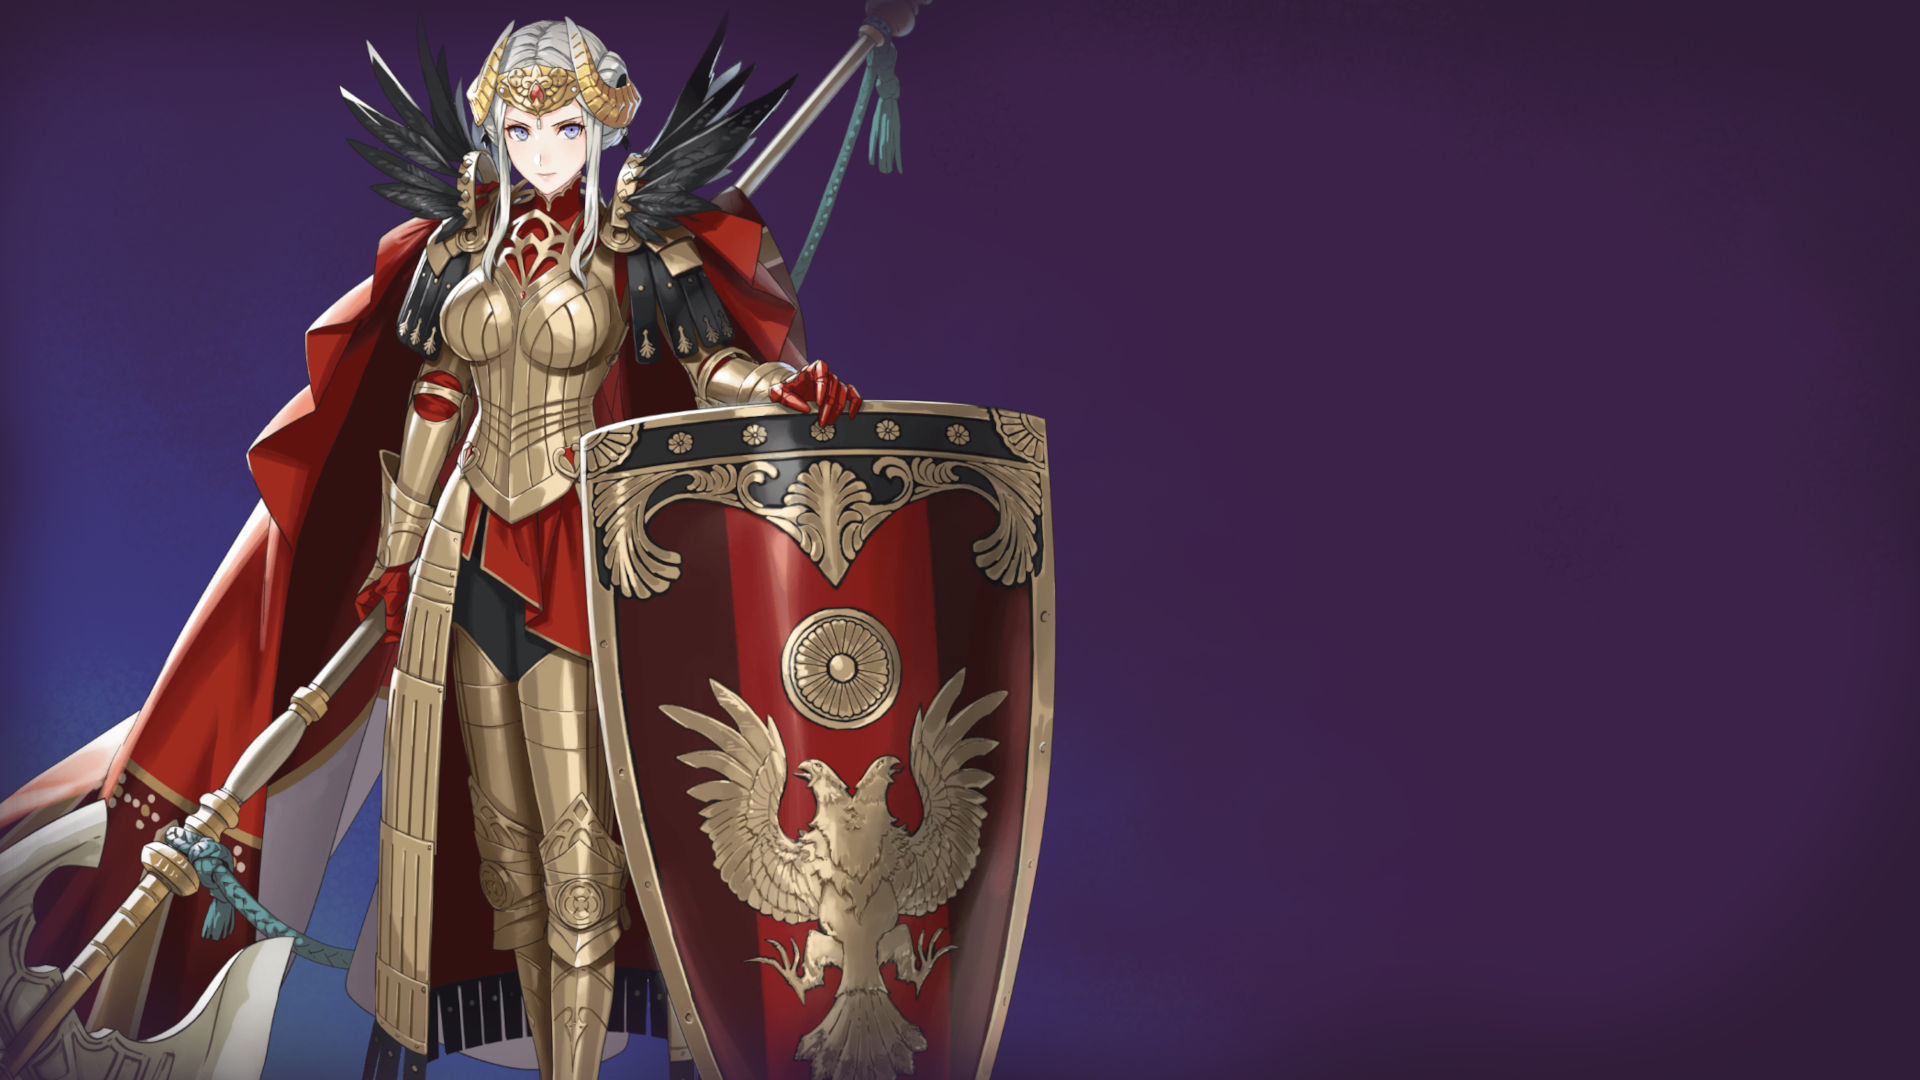 Fire Emblem Heroes character Brave Edelgard, holding a shield and sword